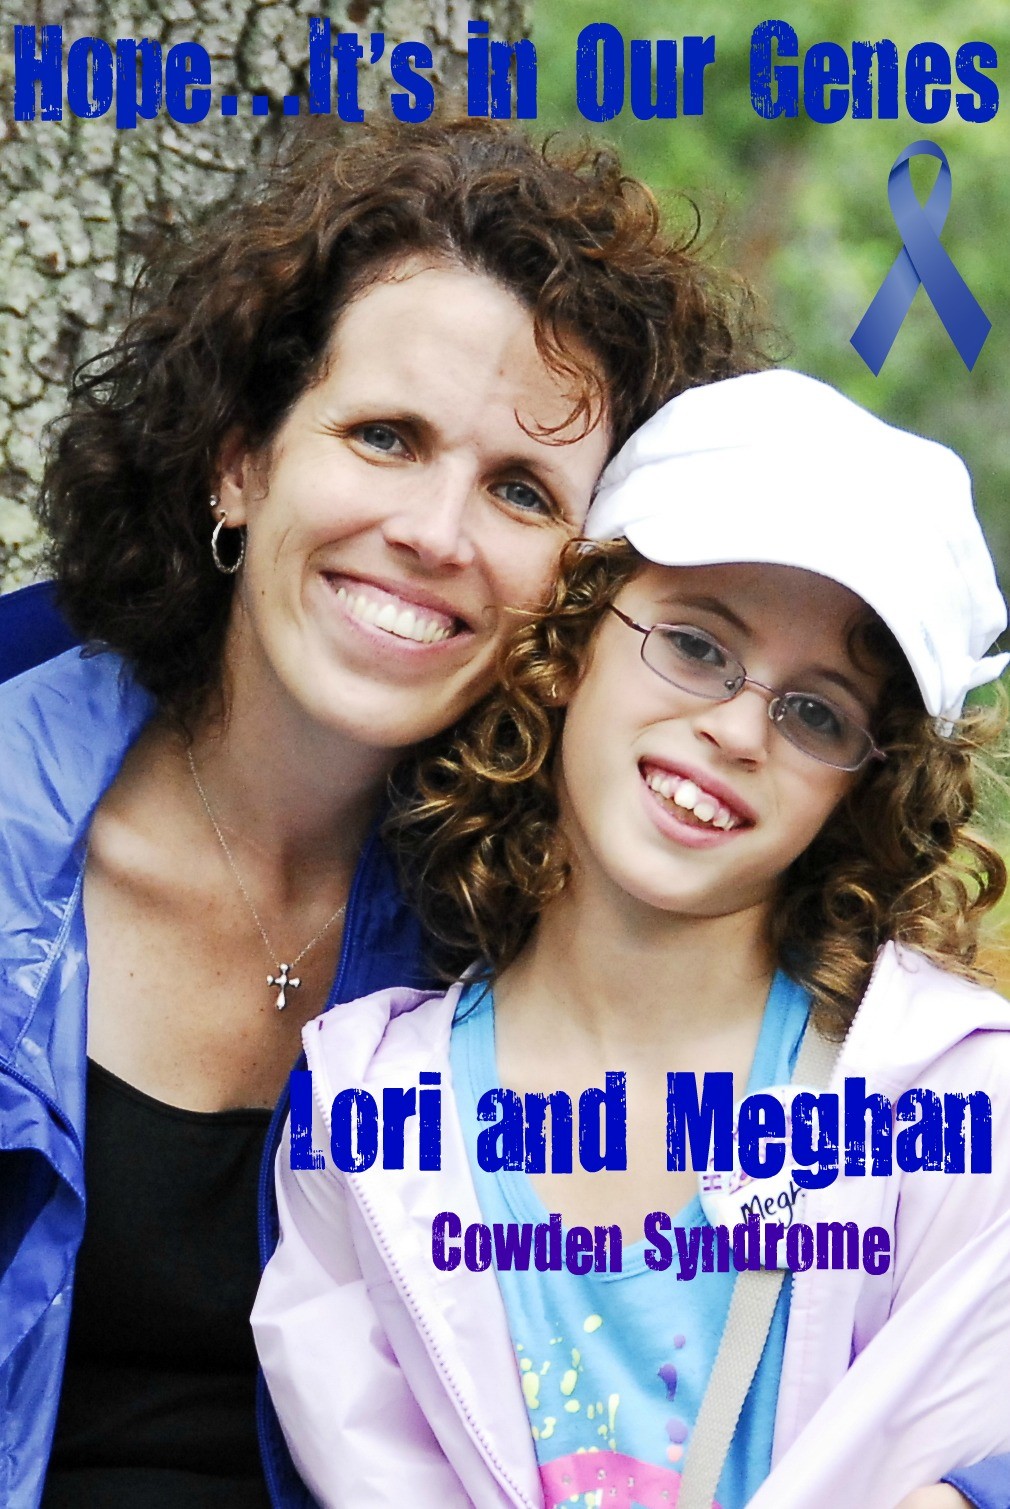 Cowden Syndrome Pictures